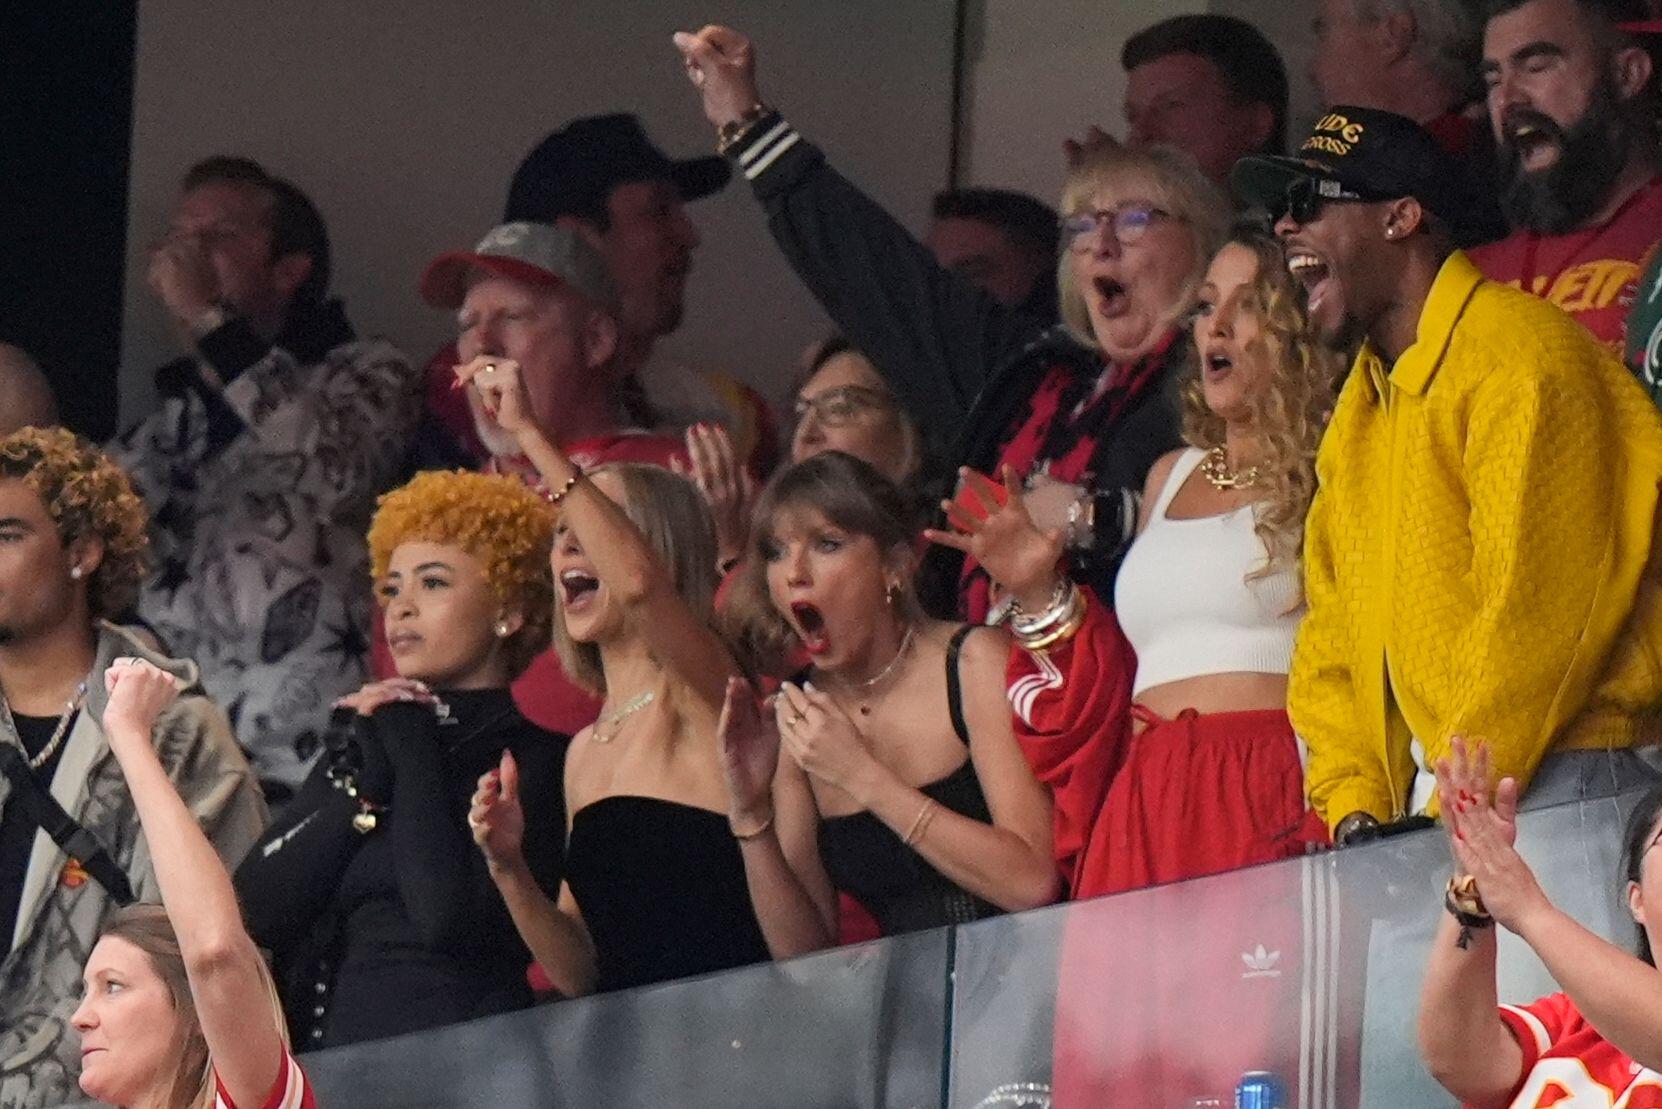 Taylor Swift (centre) reacts to a play during the first half of the Super Bowl in Las Vegas, 11-2-24.